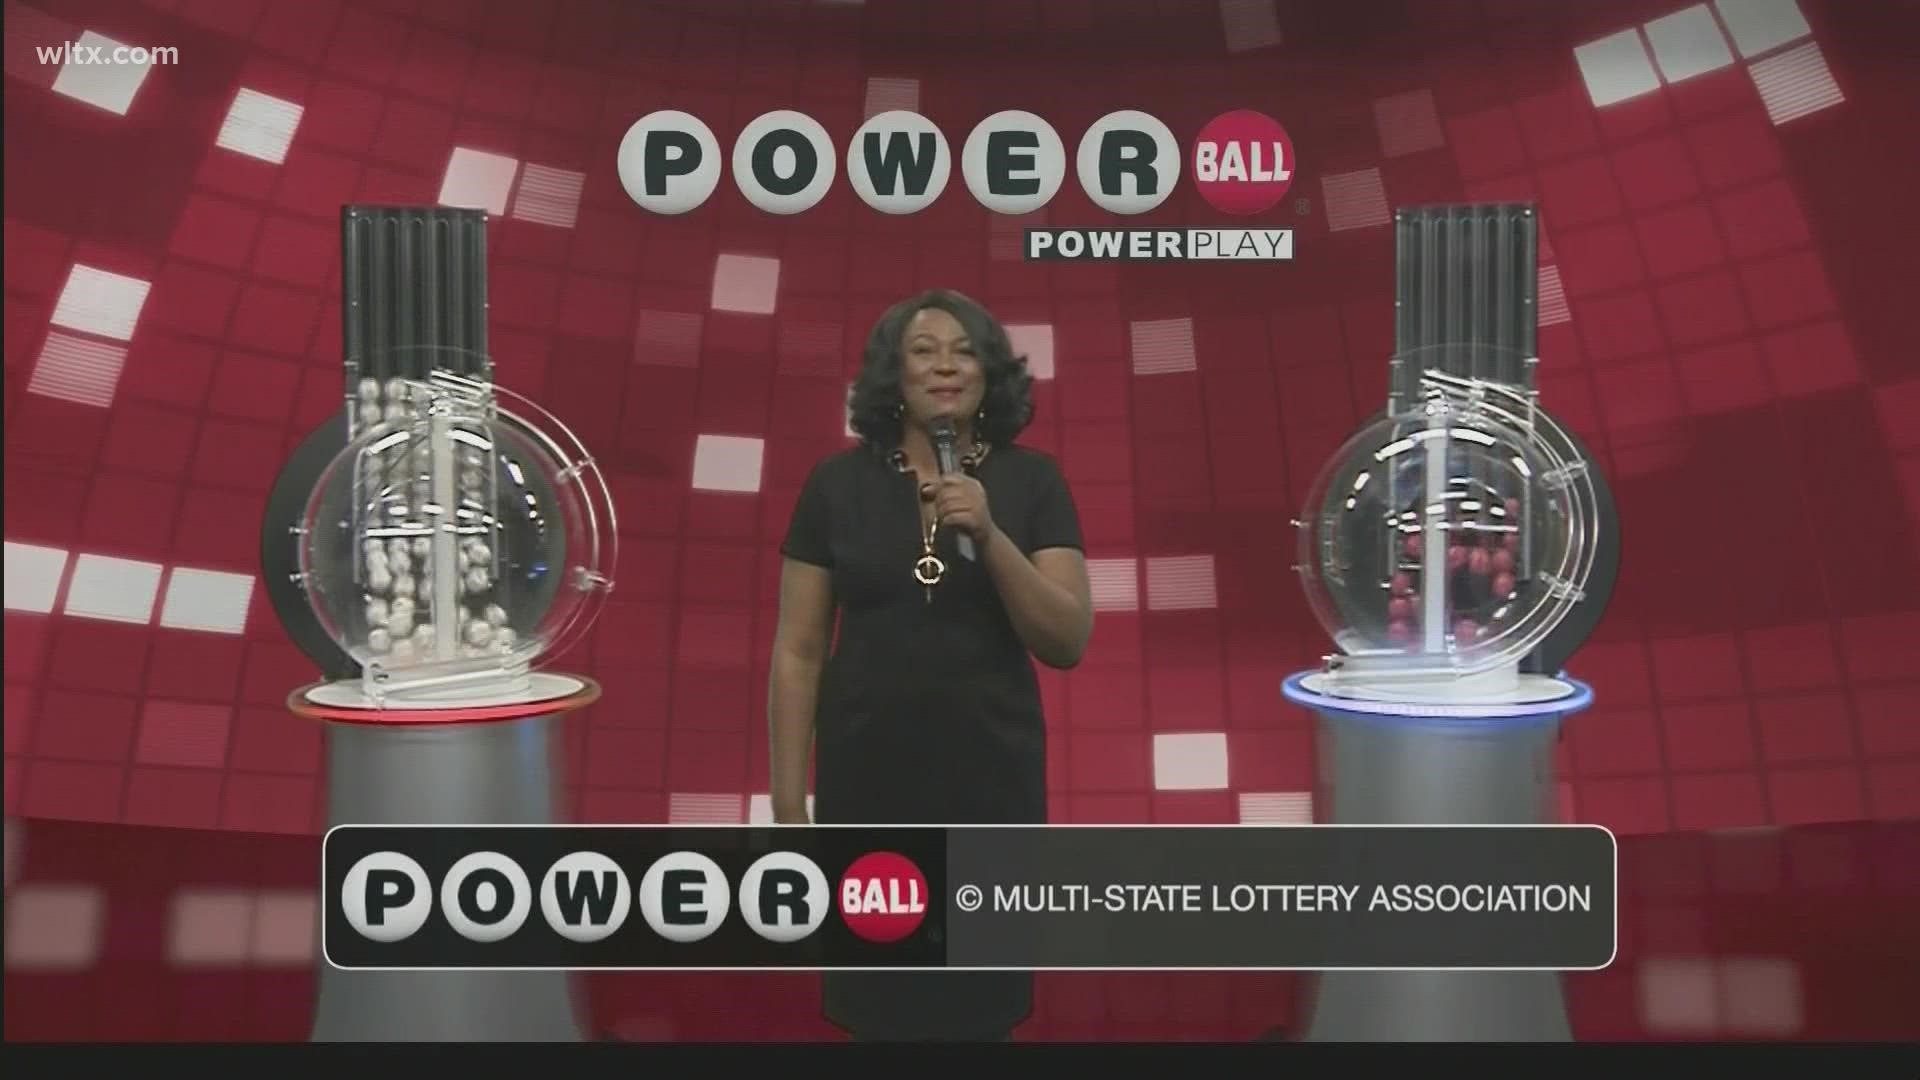 Here are the winning Powerball numbers for October 6, 2021.